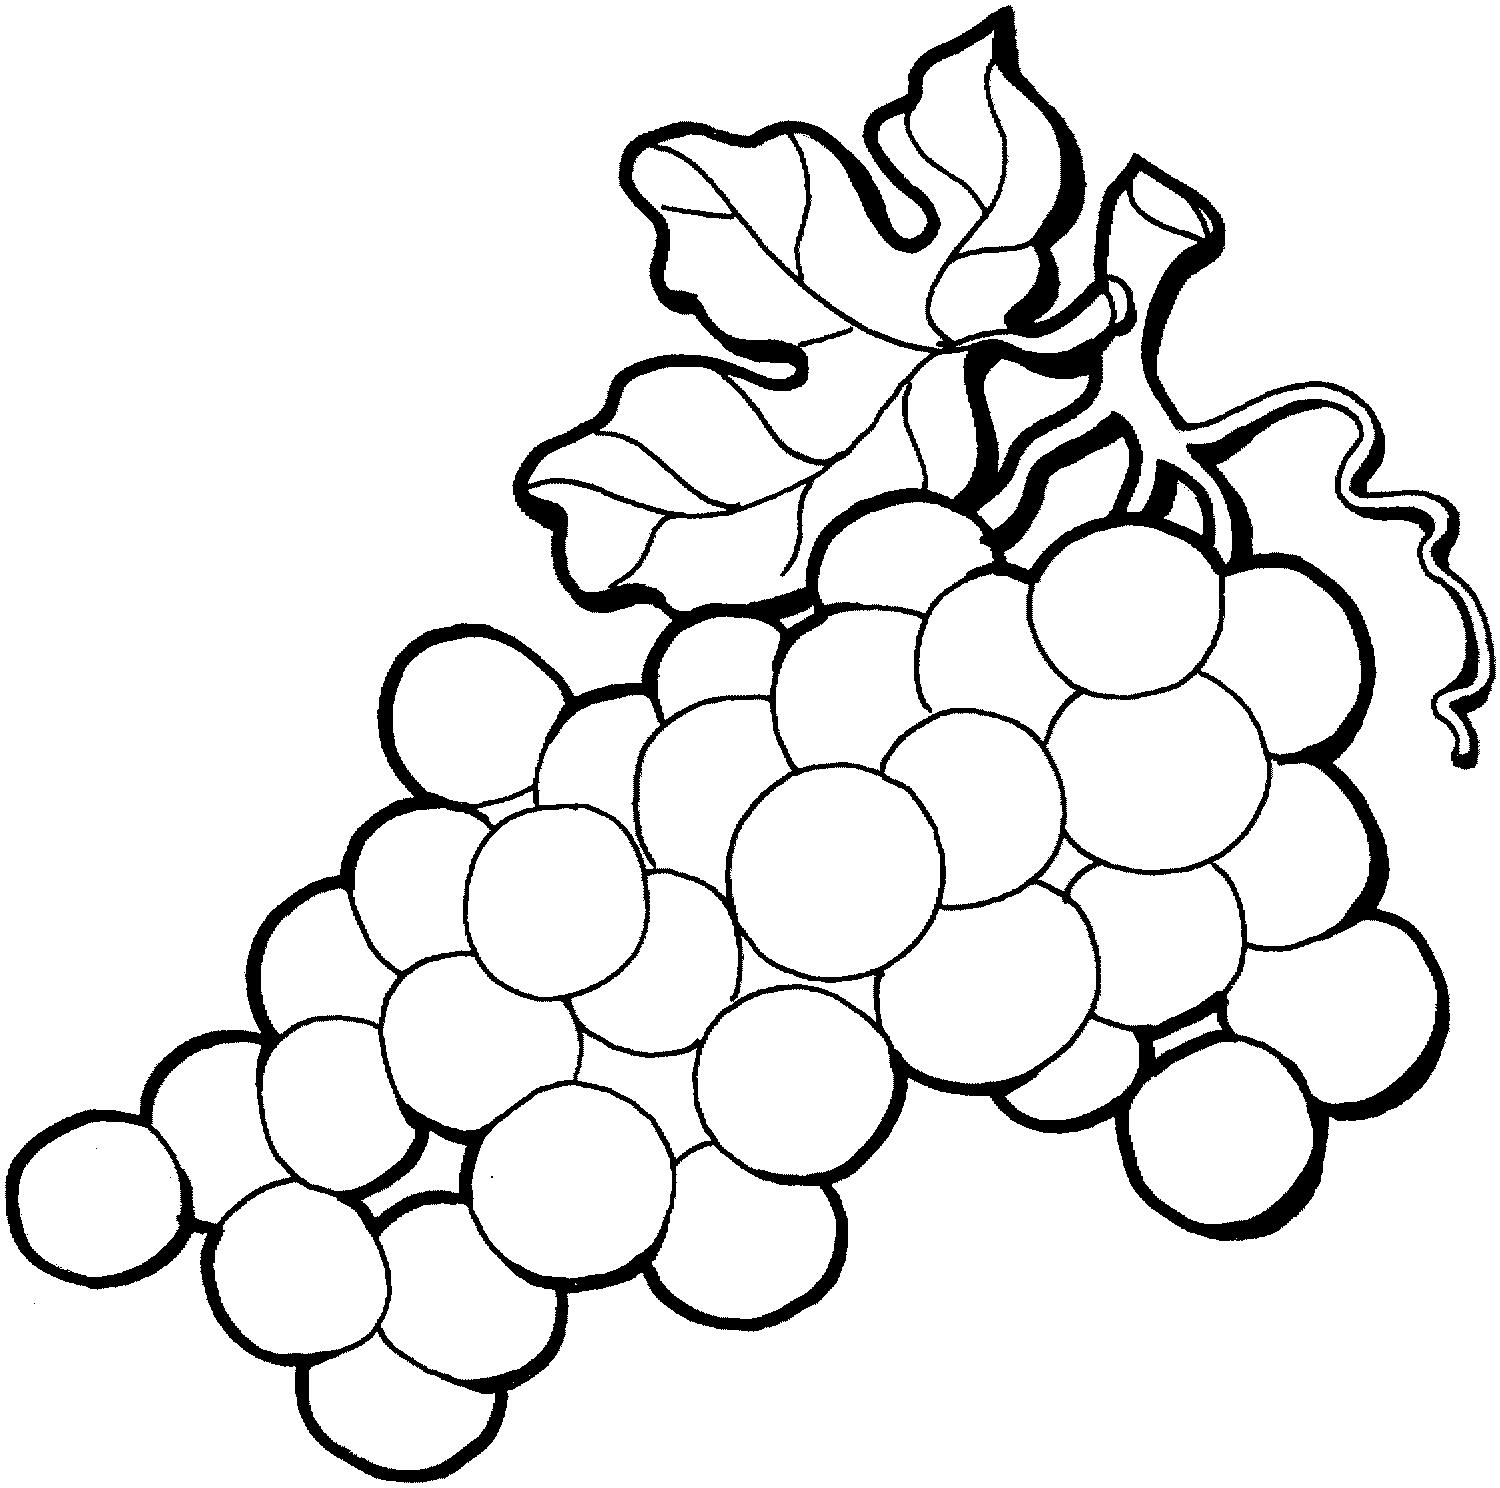 How to Draw Grapes - Easy Drawing Tutorial For Kids